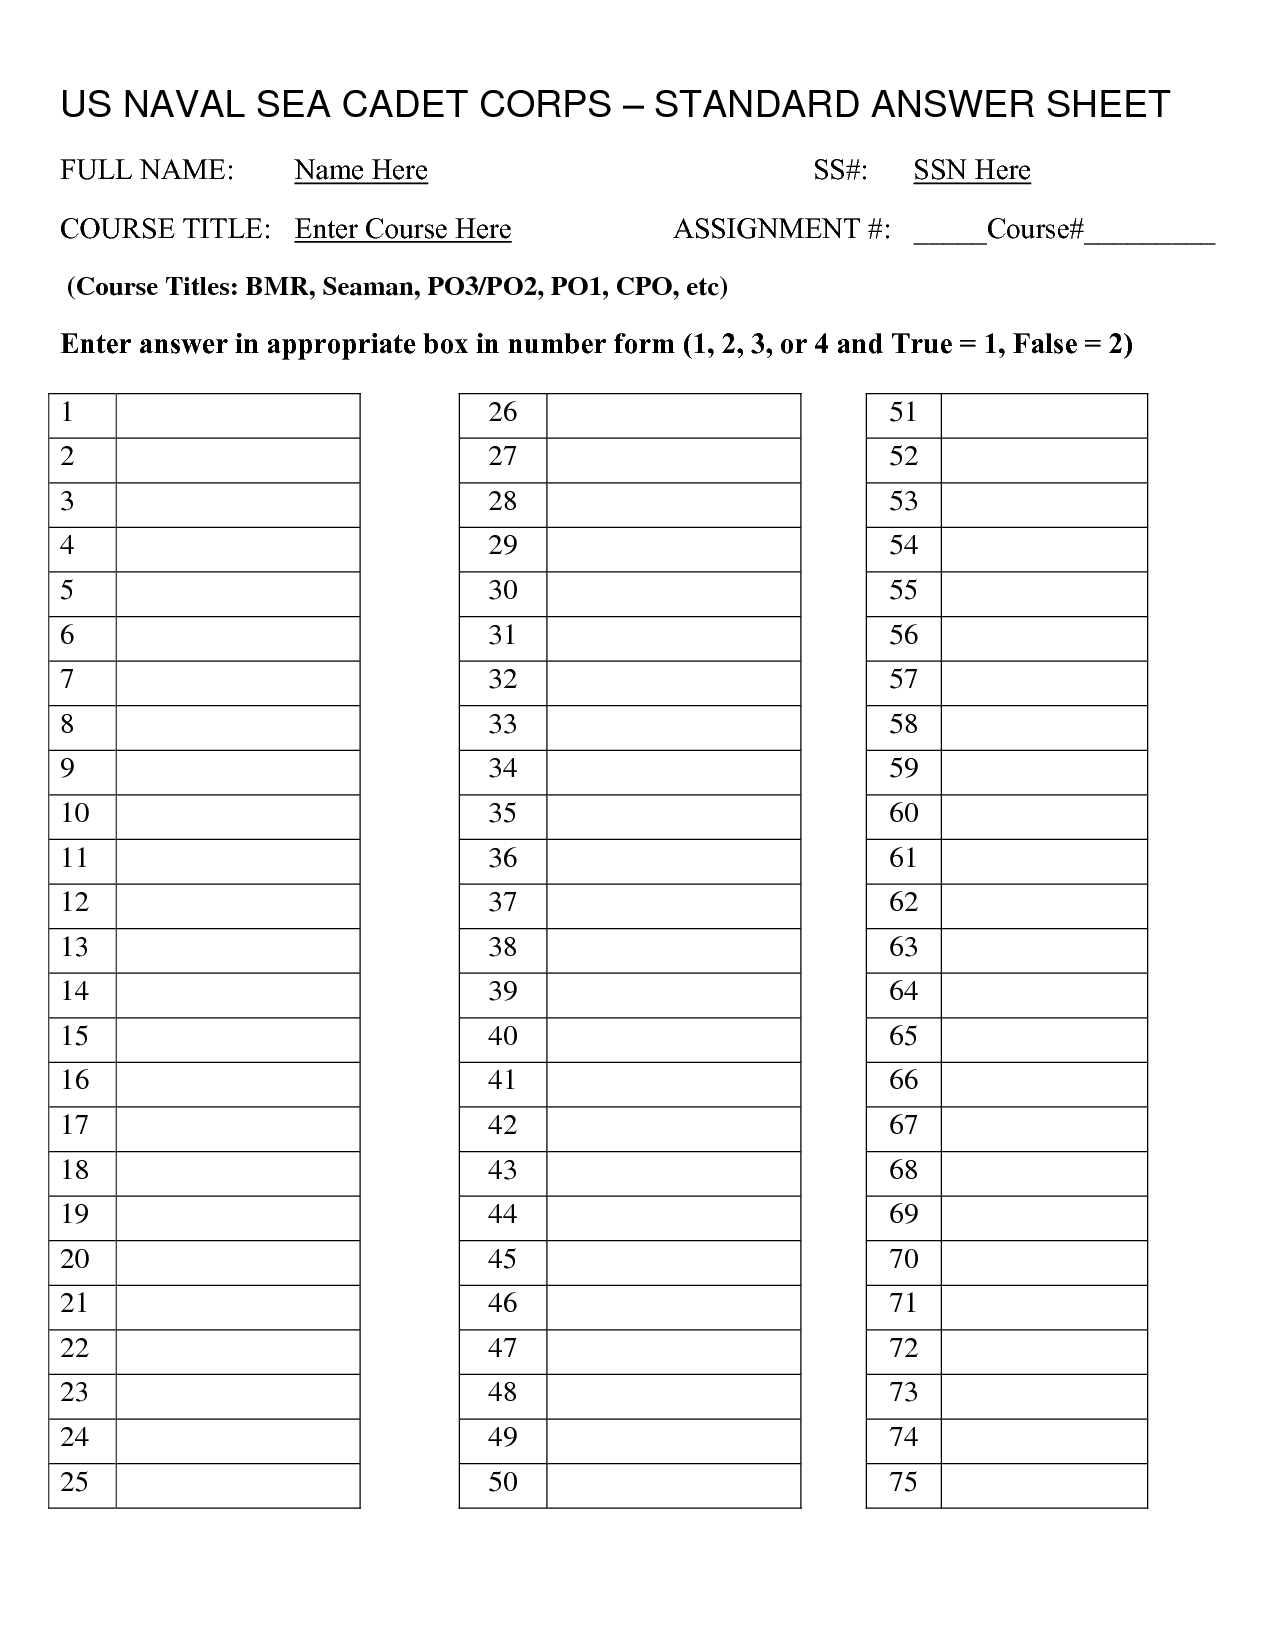 multiple-choice-answer-sheet-template-doctemplates